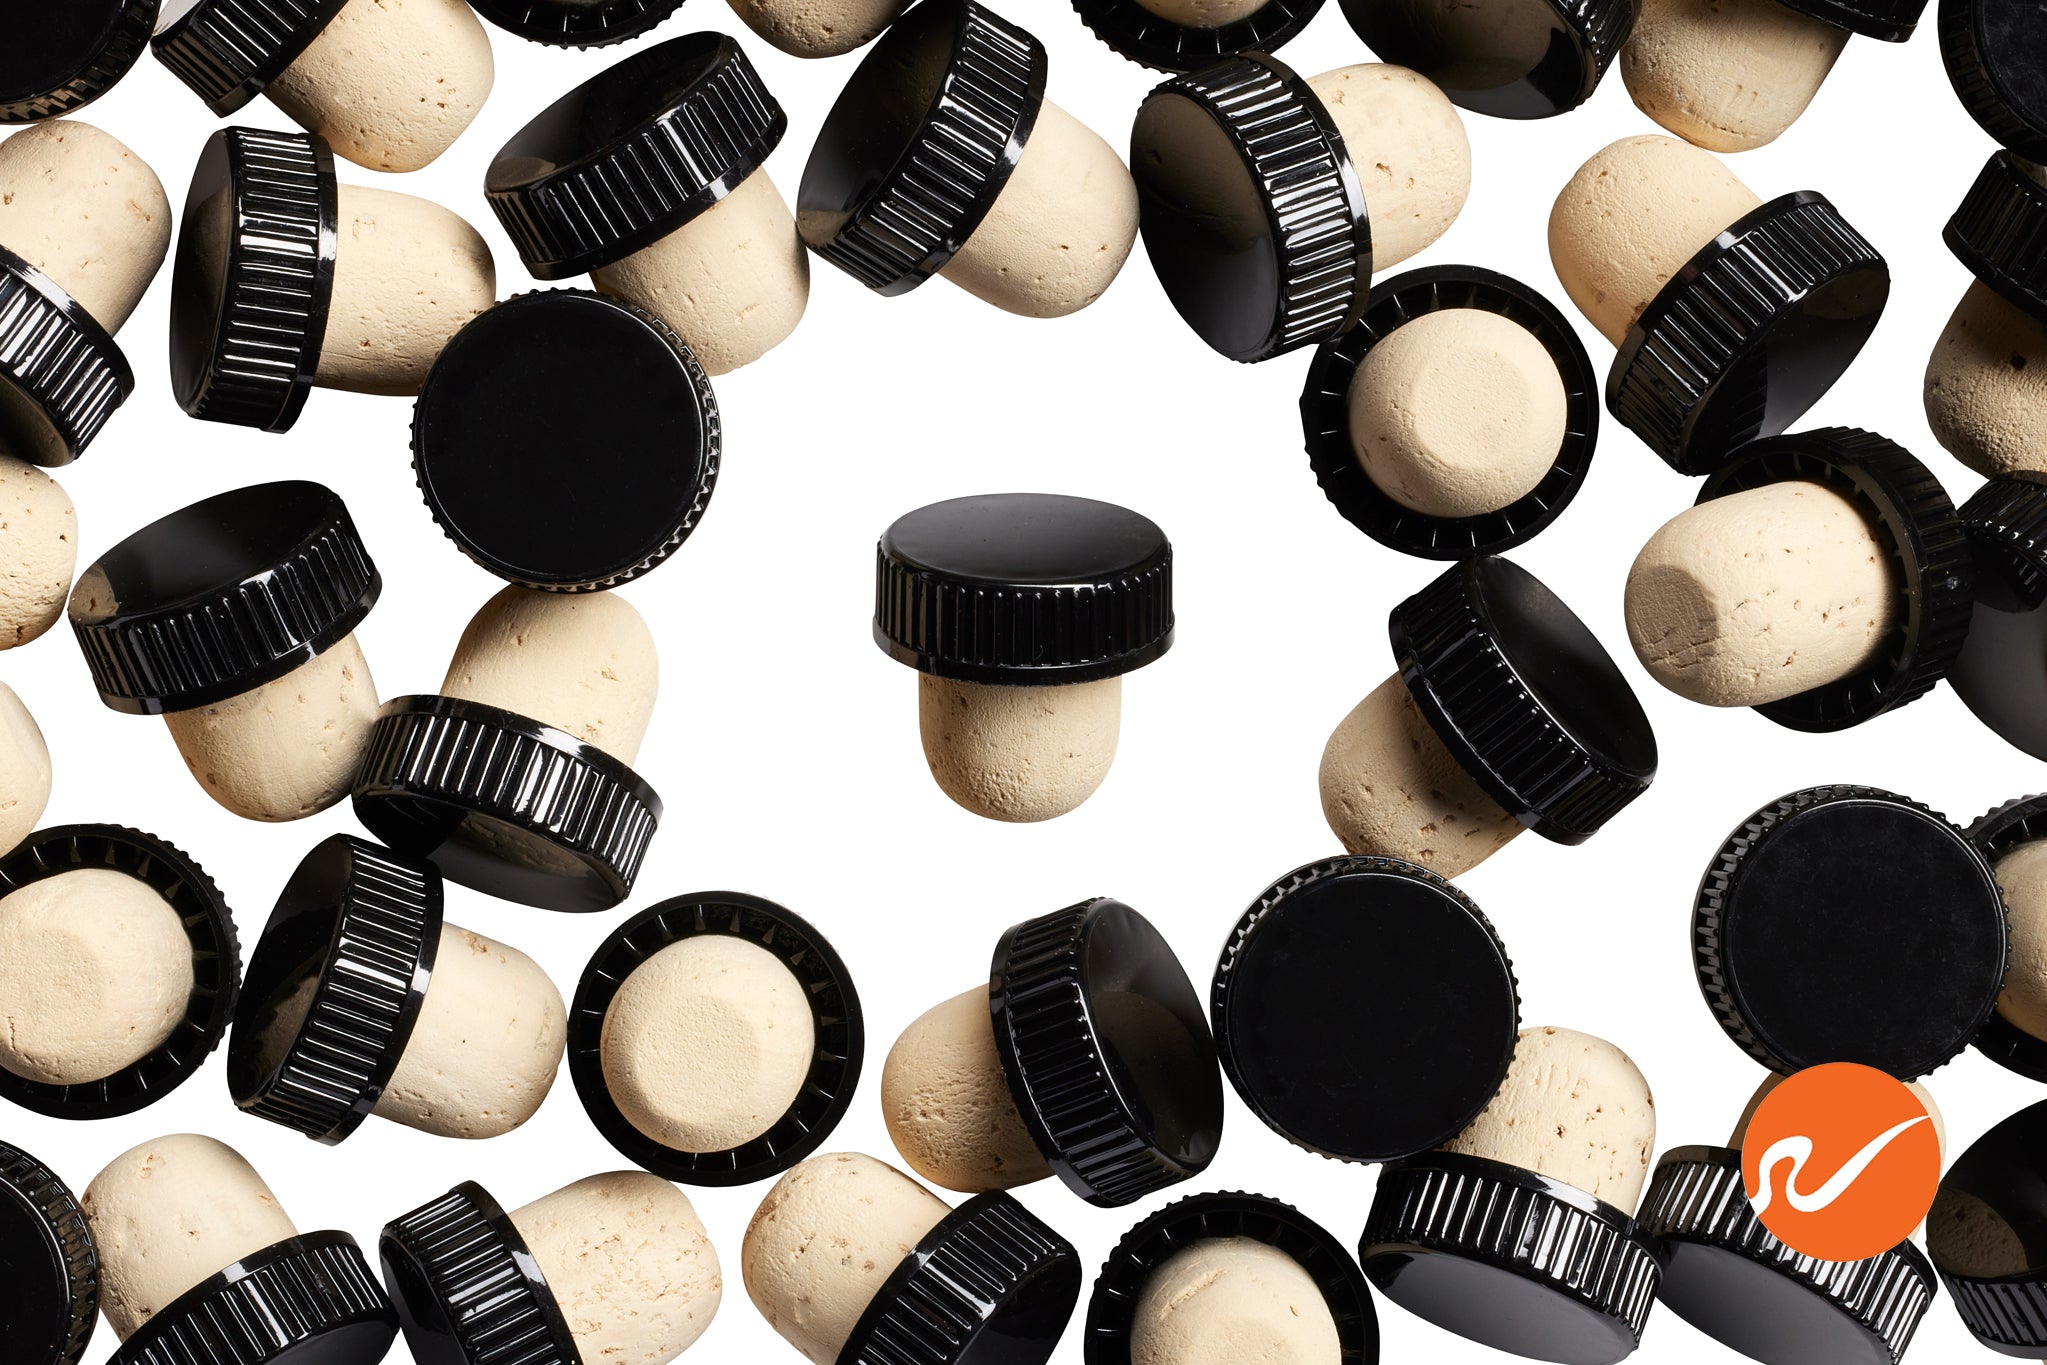 20.5mm Natural T-Corks with Black Tops - WidgetCo